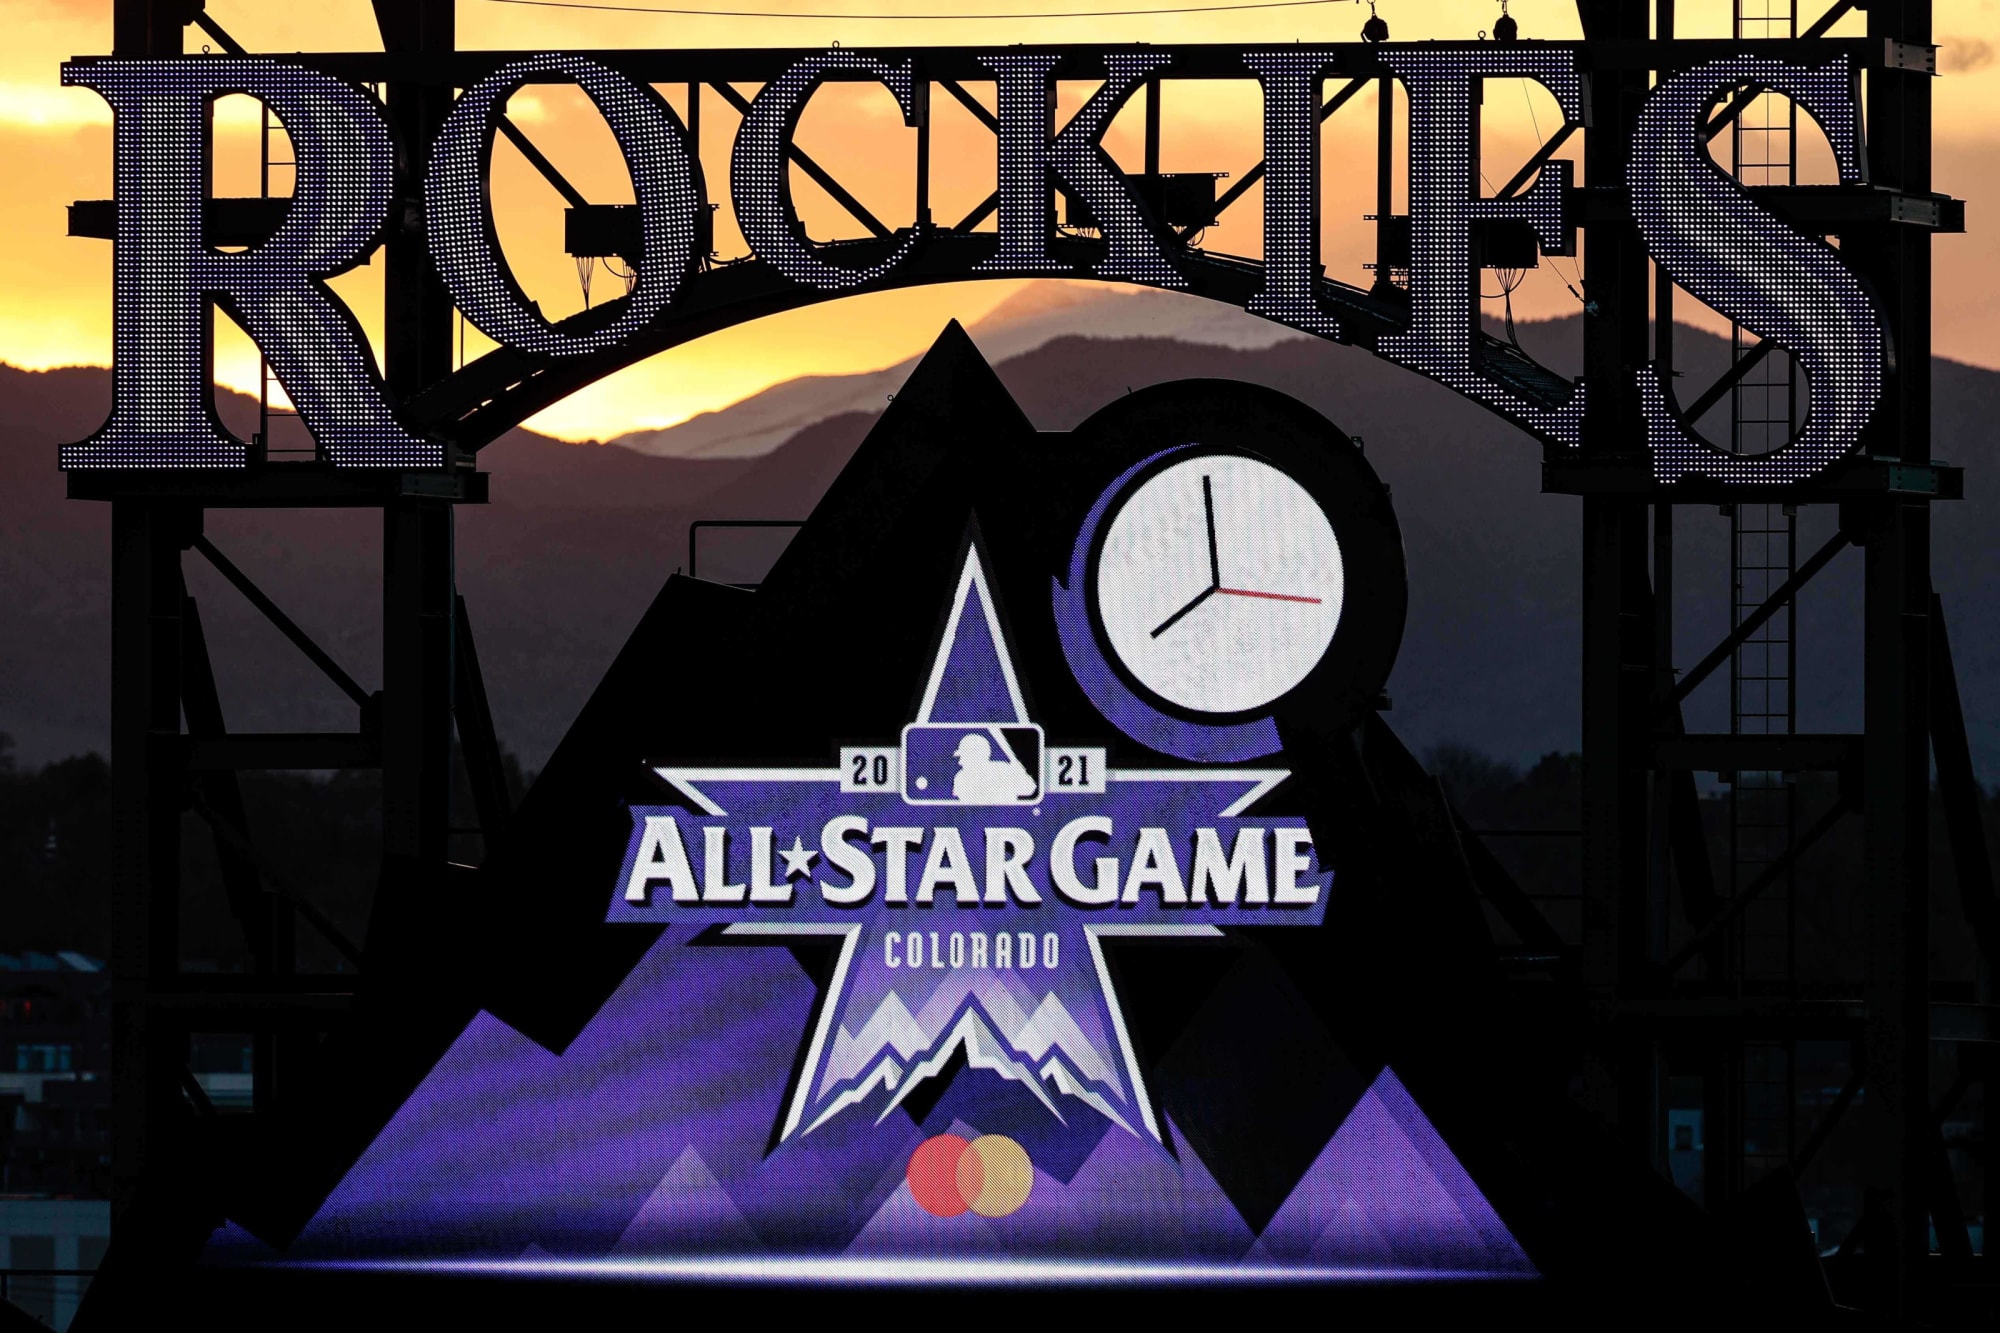 Colorado Rockies What you need to know about AllStar Game voting